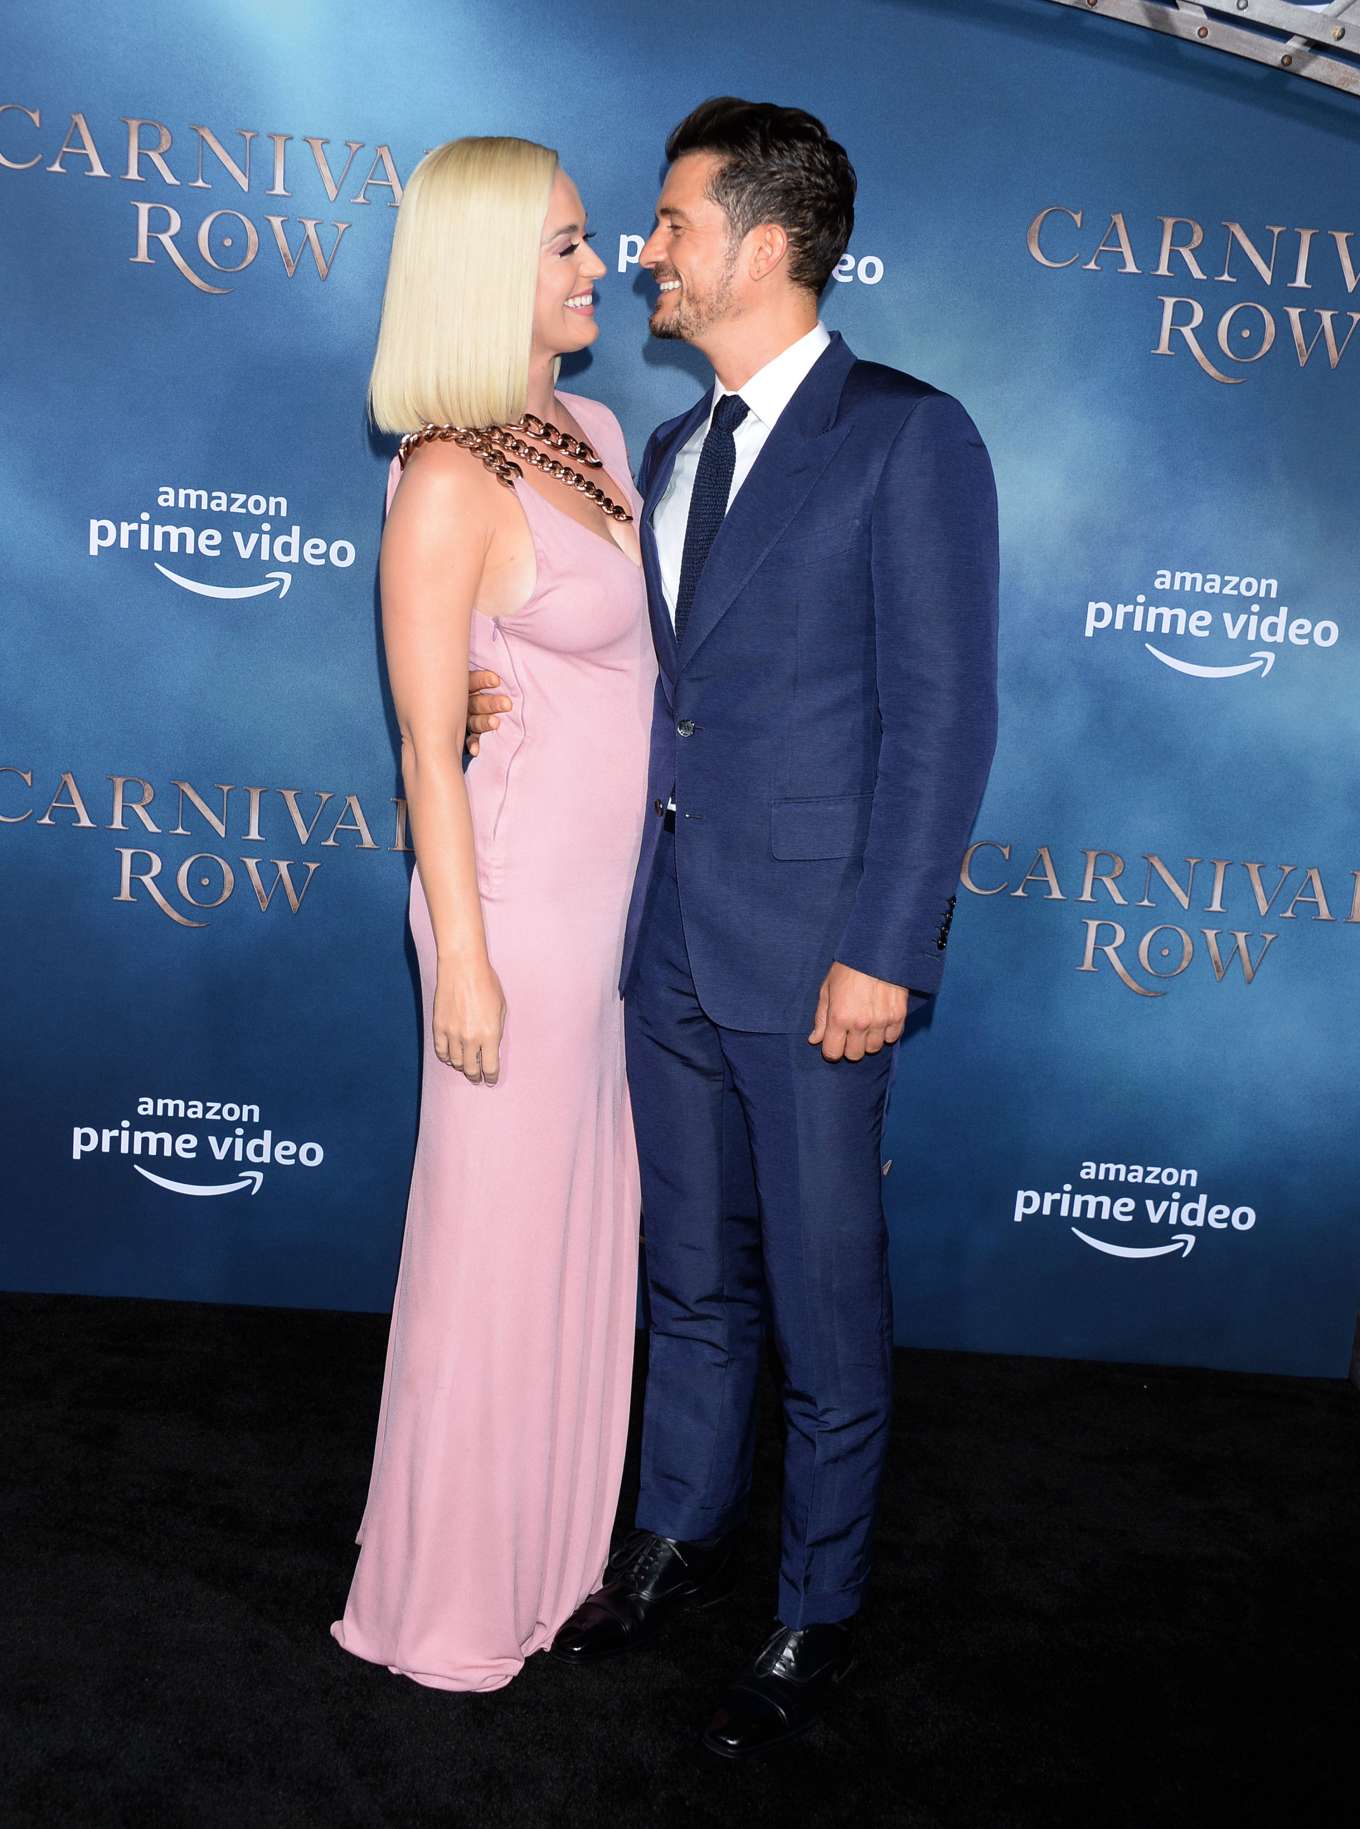 Katy Perry and Orlando Bloom Row premiere